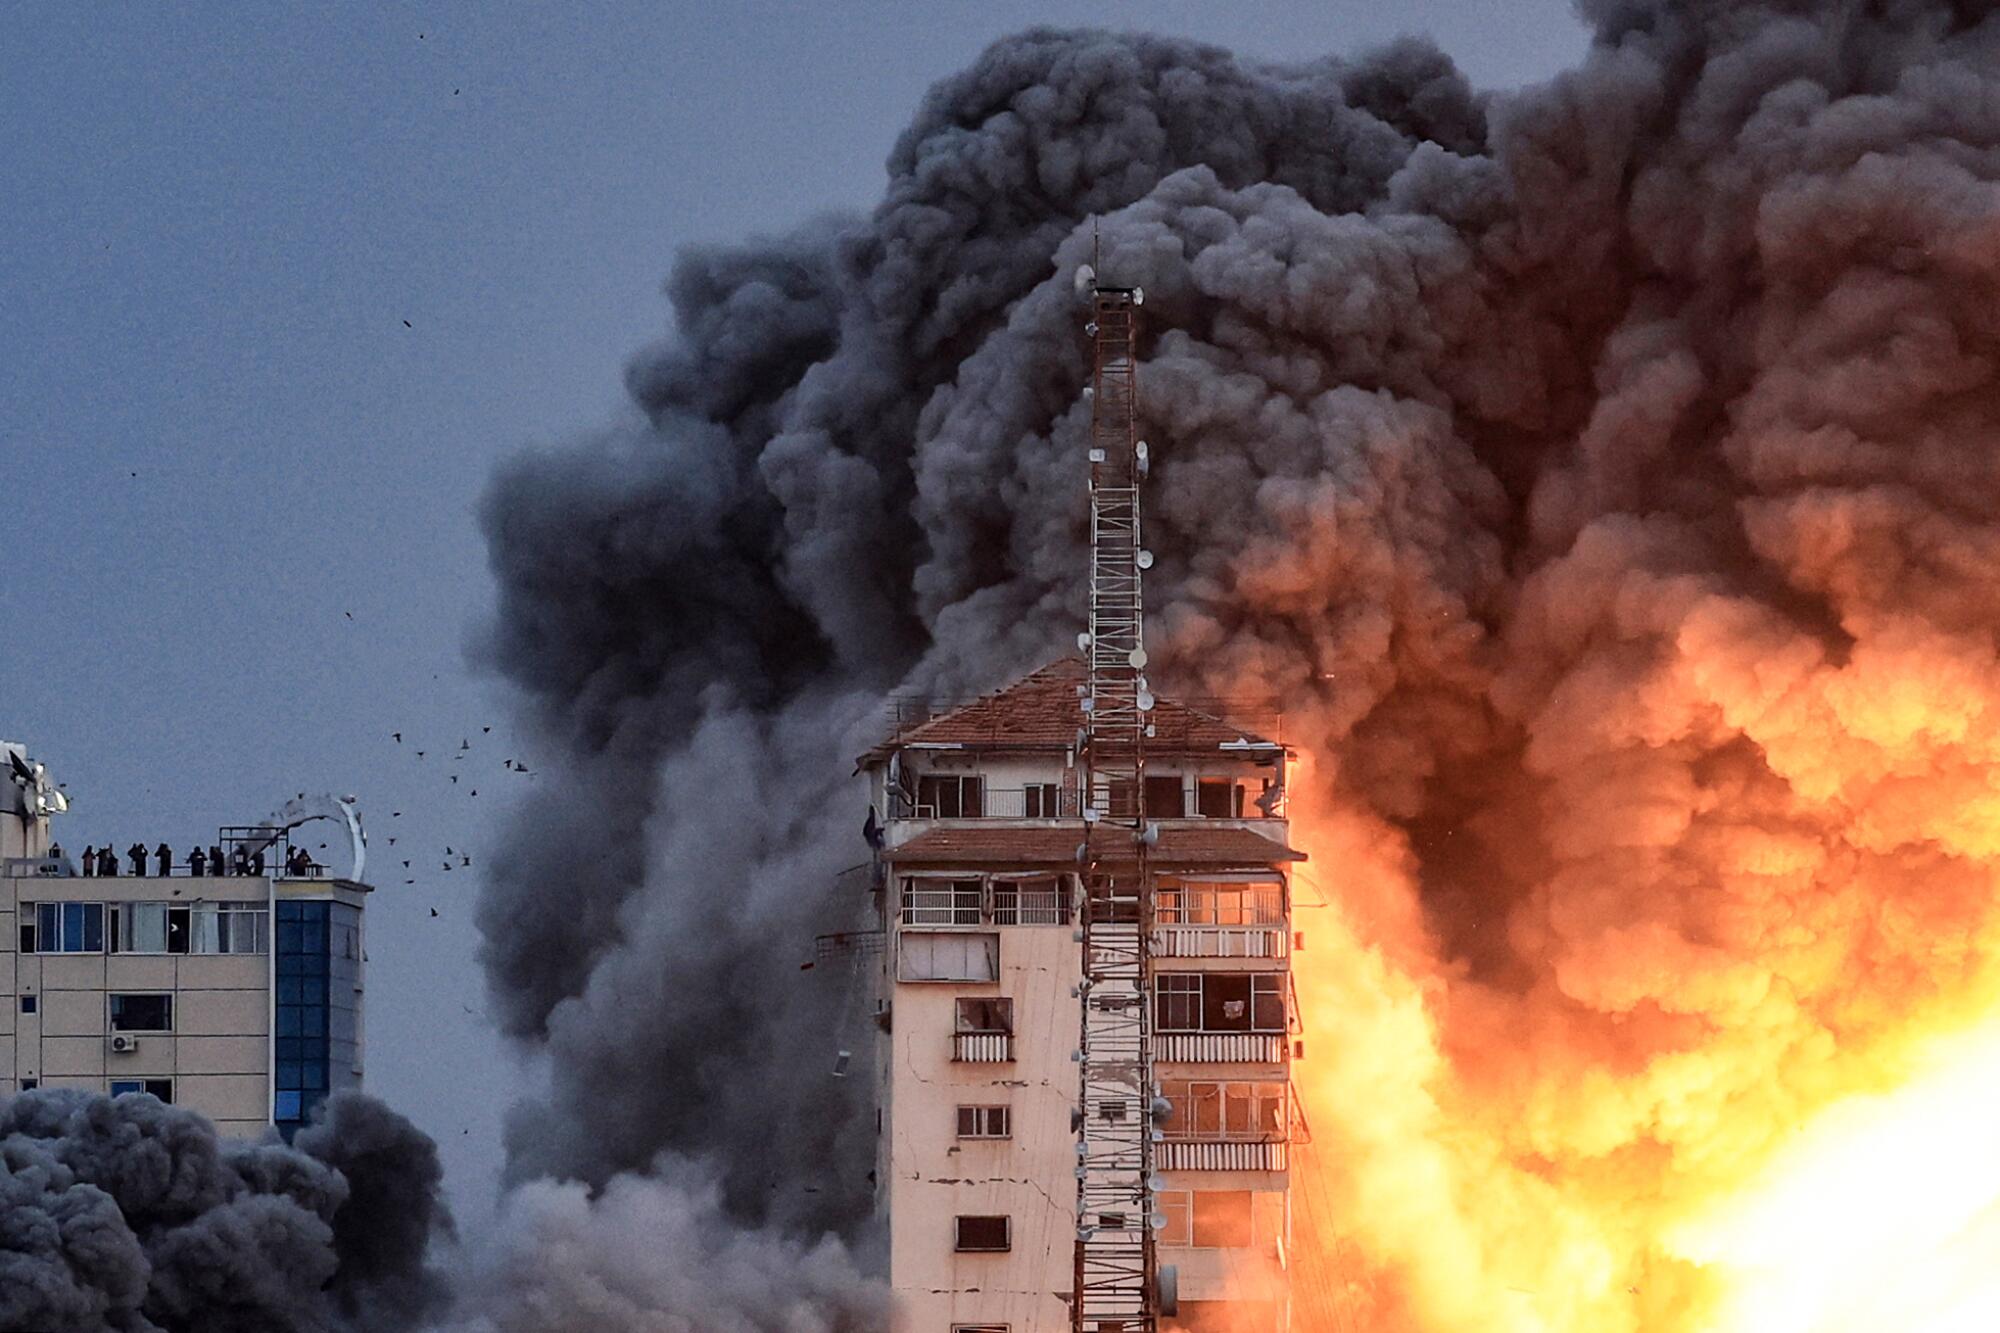 People standing on a rooftop watch as a ball of fire and smoke rises above a building in Gaza City.